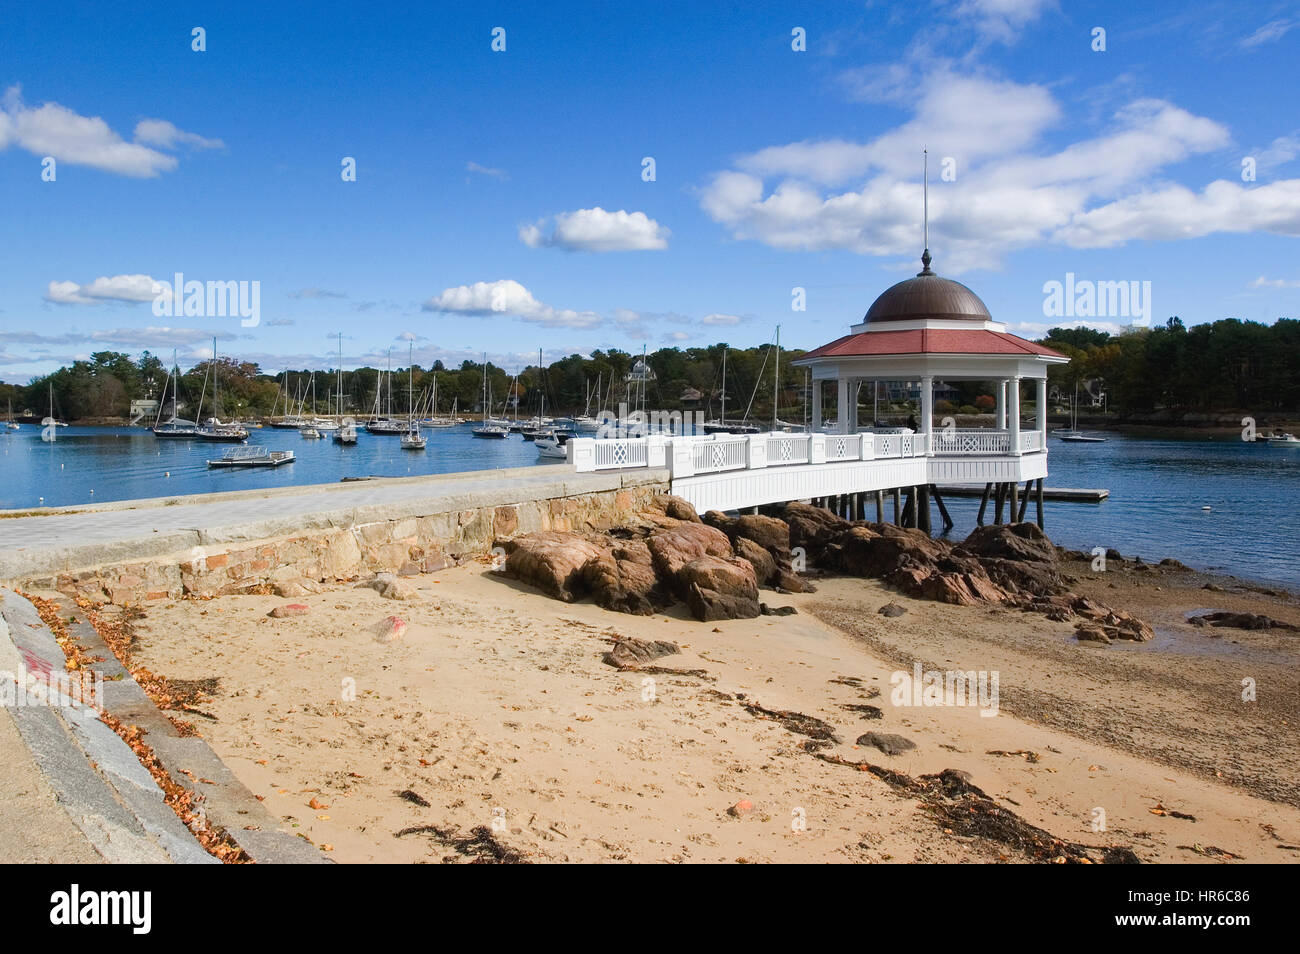 Tuck's Point beach and pavilion in the seaside  town of Manchester by the Sea, Massachusetts - Setting for the movie of the same name. Stock Photo